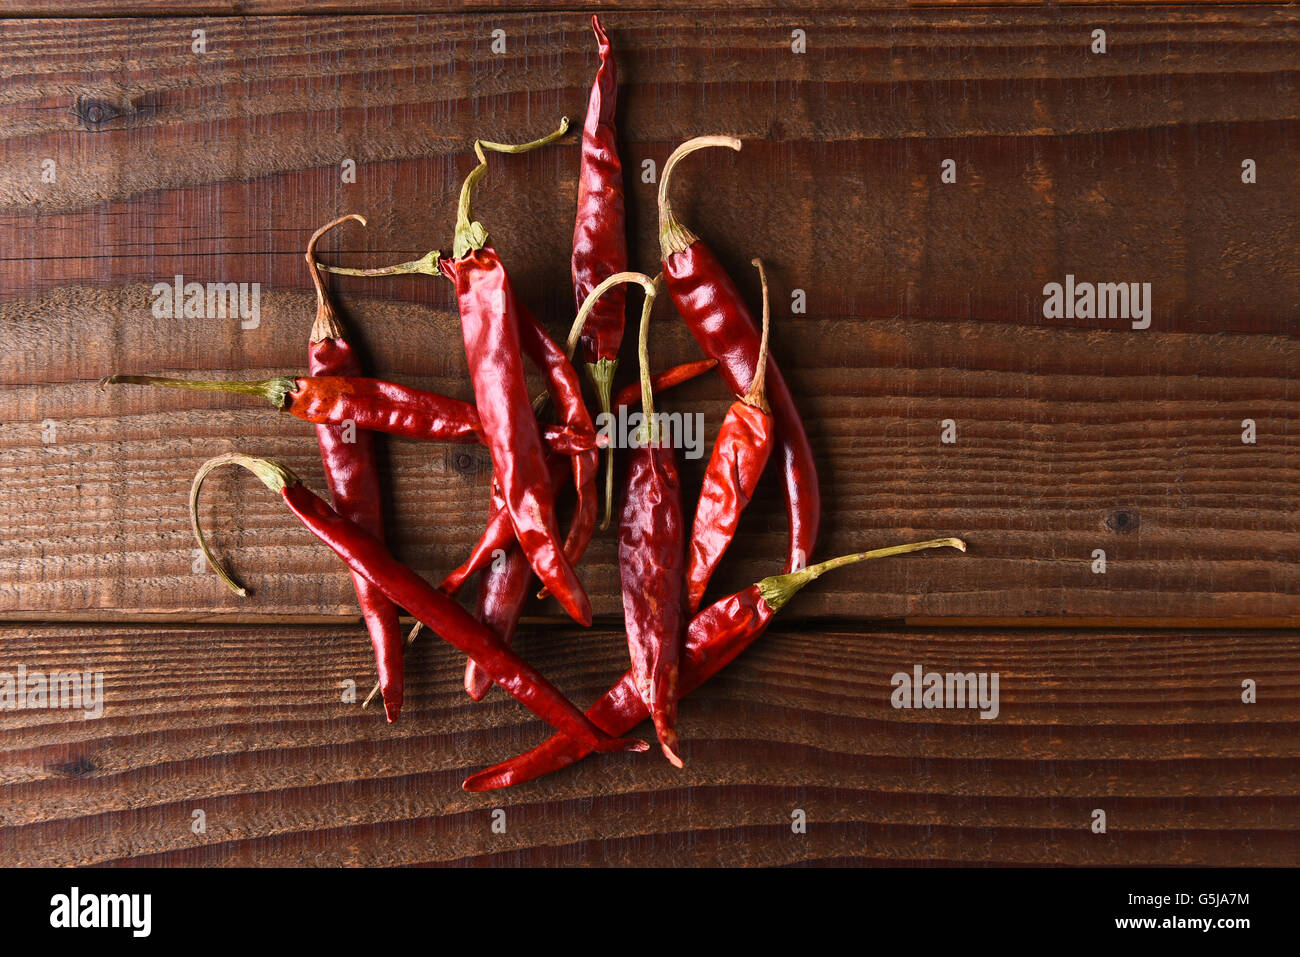 Dried Chili Still Life. Horizontal format on a rustic wood table with copy space. Stock Photo